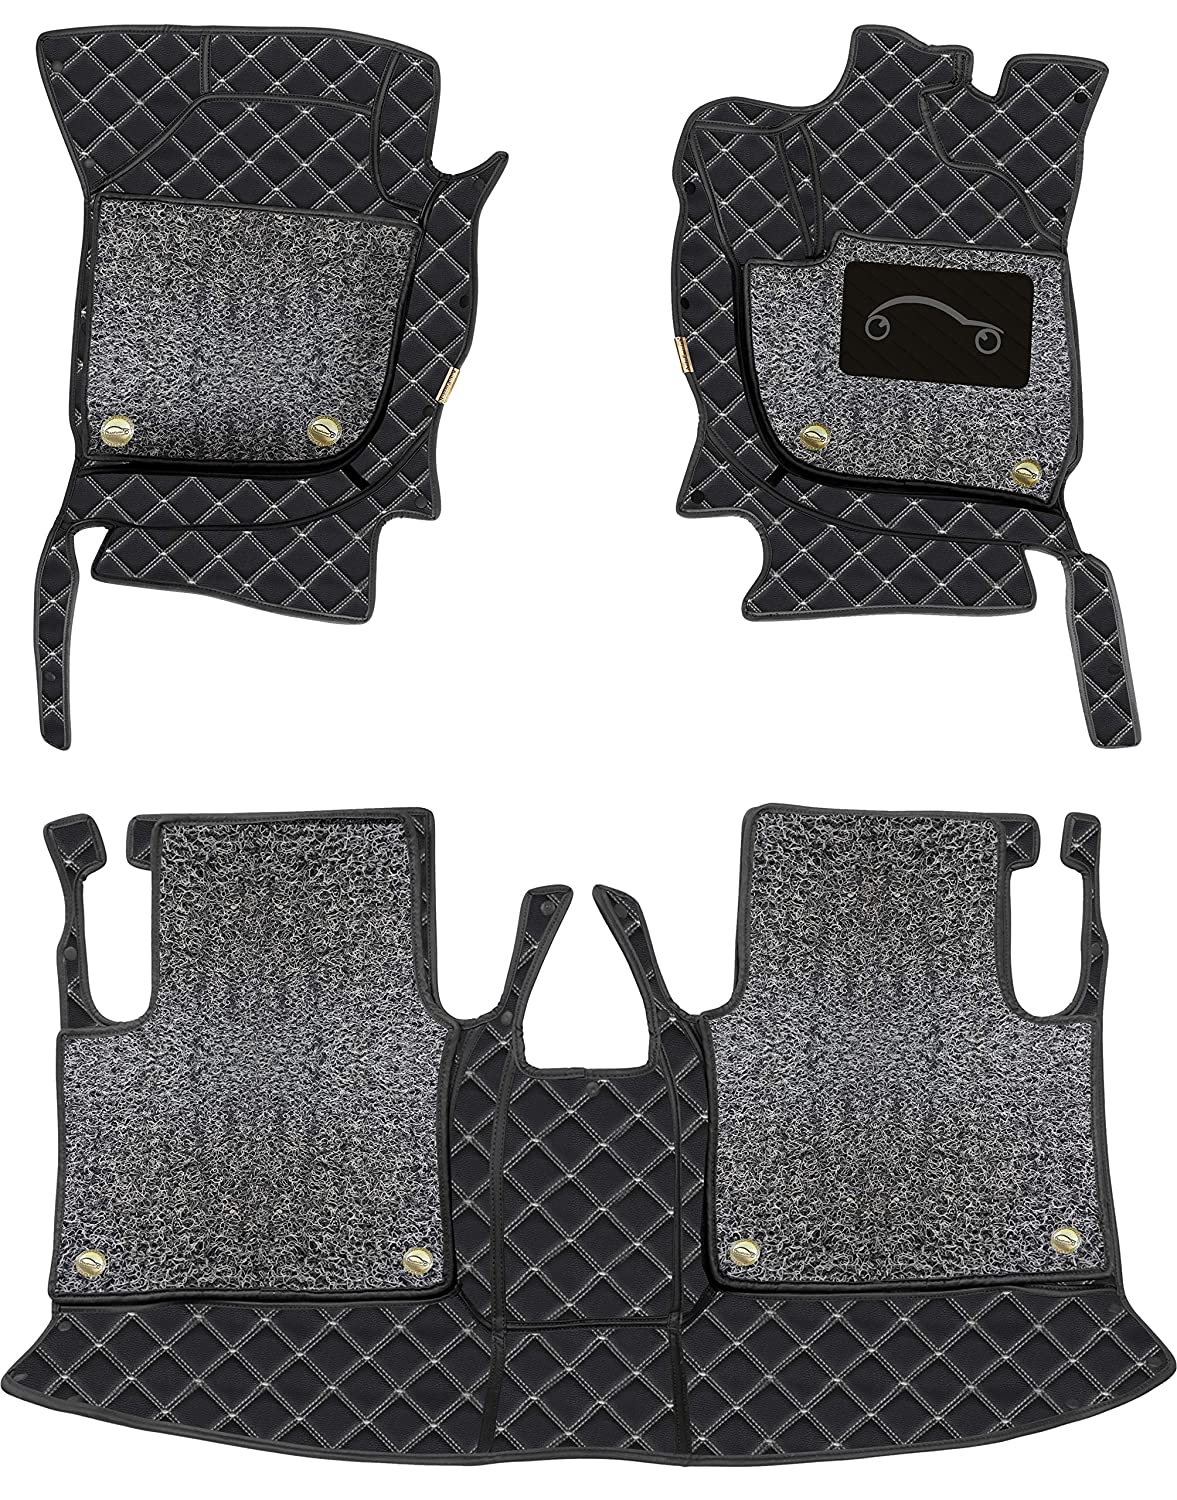 Volvo XC40 2019 7D Luxury Car Mat, All Weather Proof, Anti-Skid, 100% Waterproof & Odorless with Unique Diamond Fish Design (24mm Luxury PU Leather, 2 Rows)